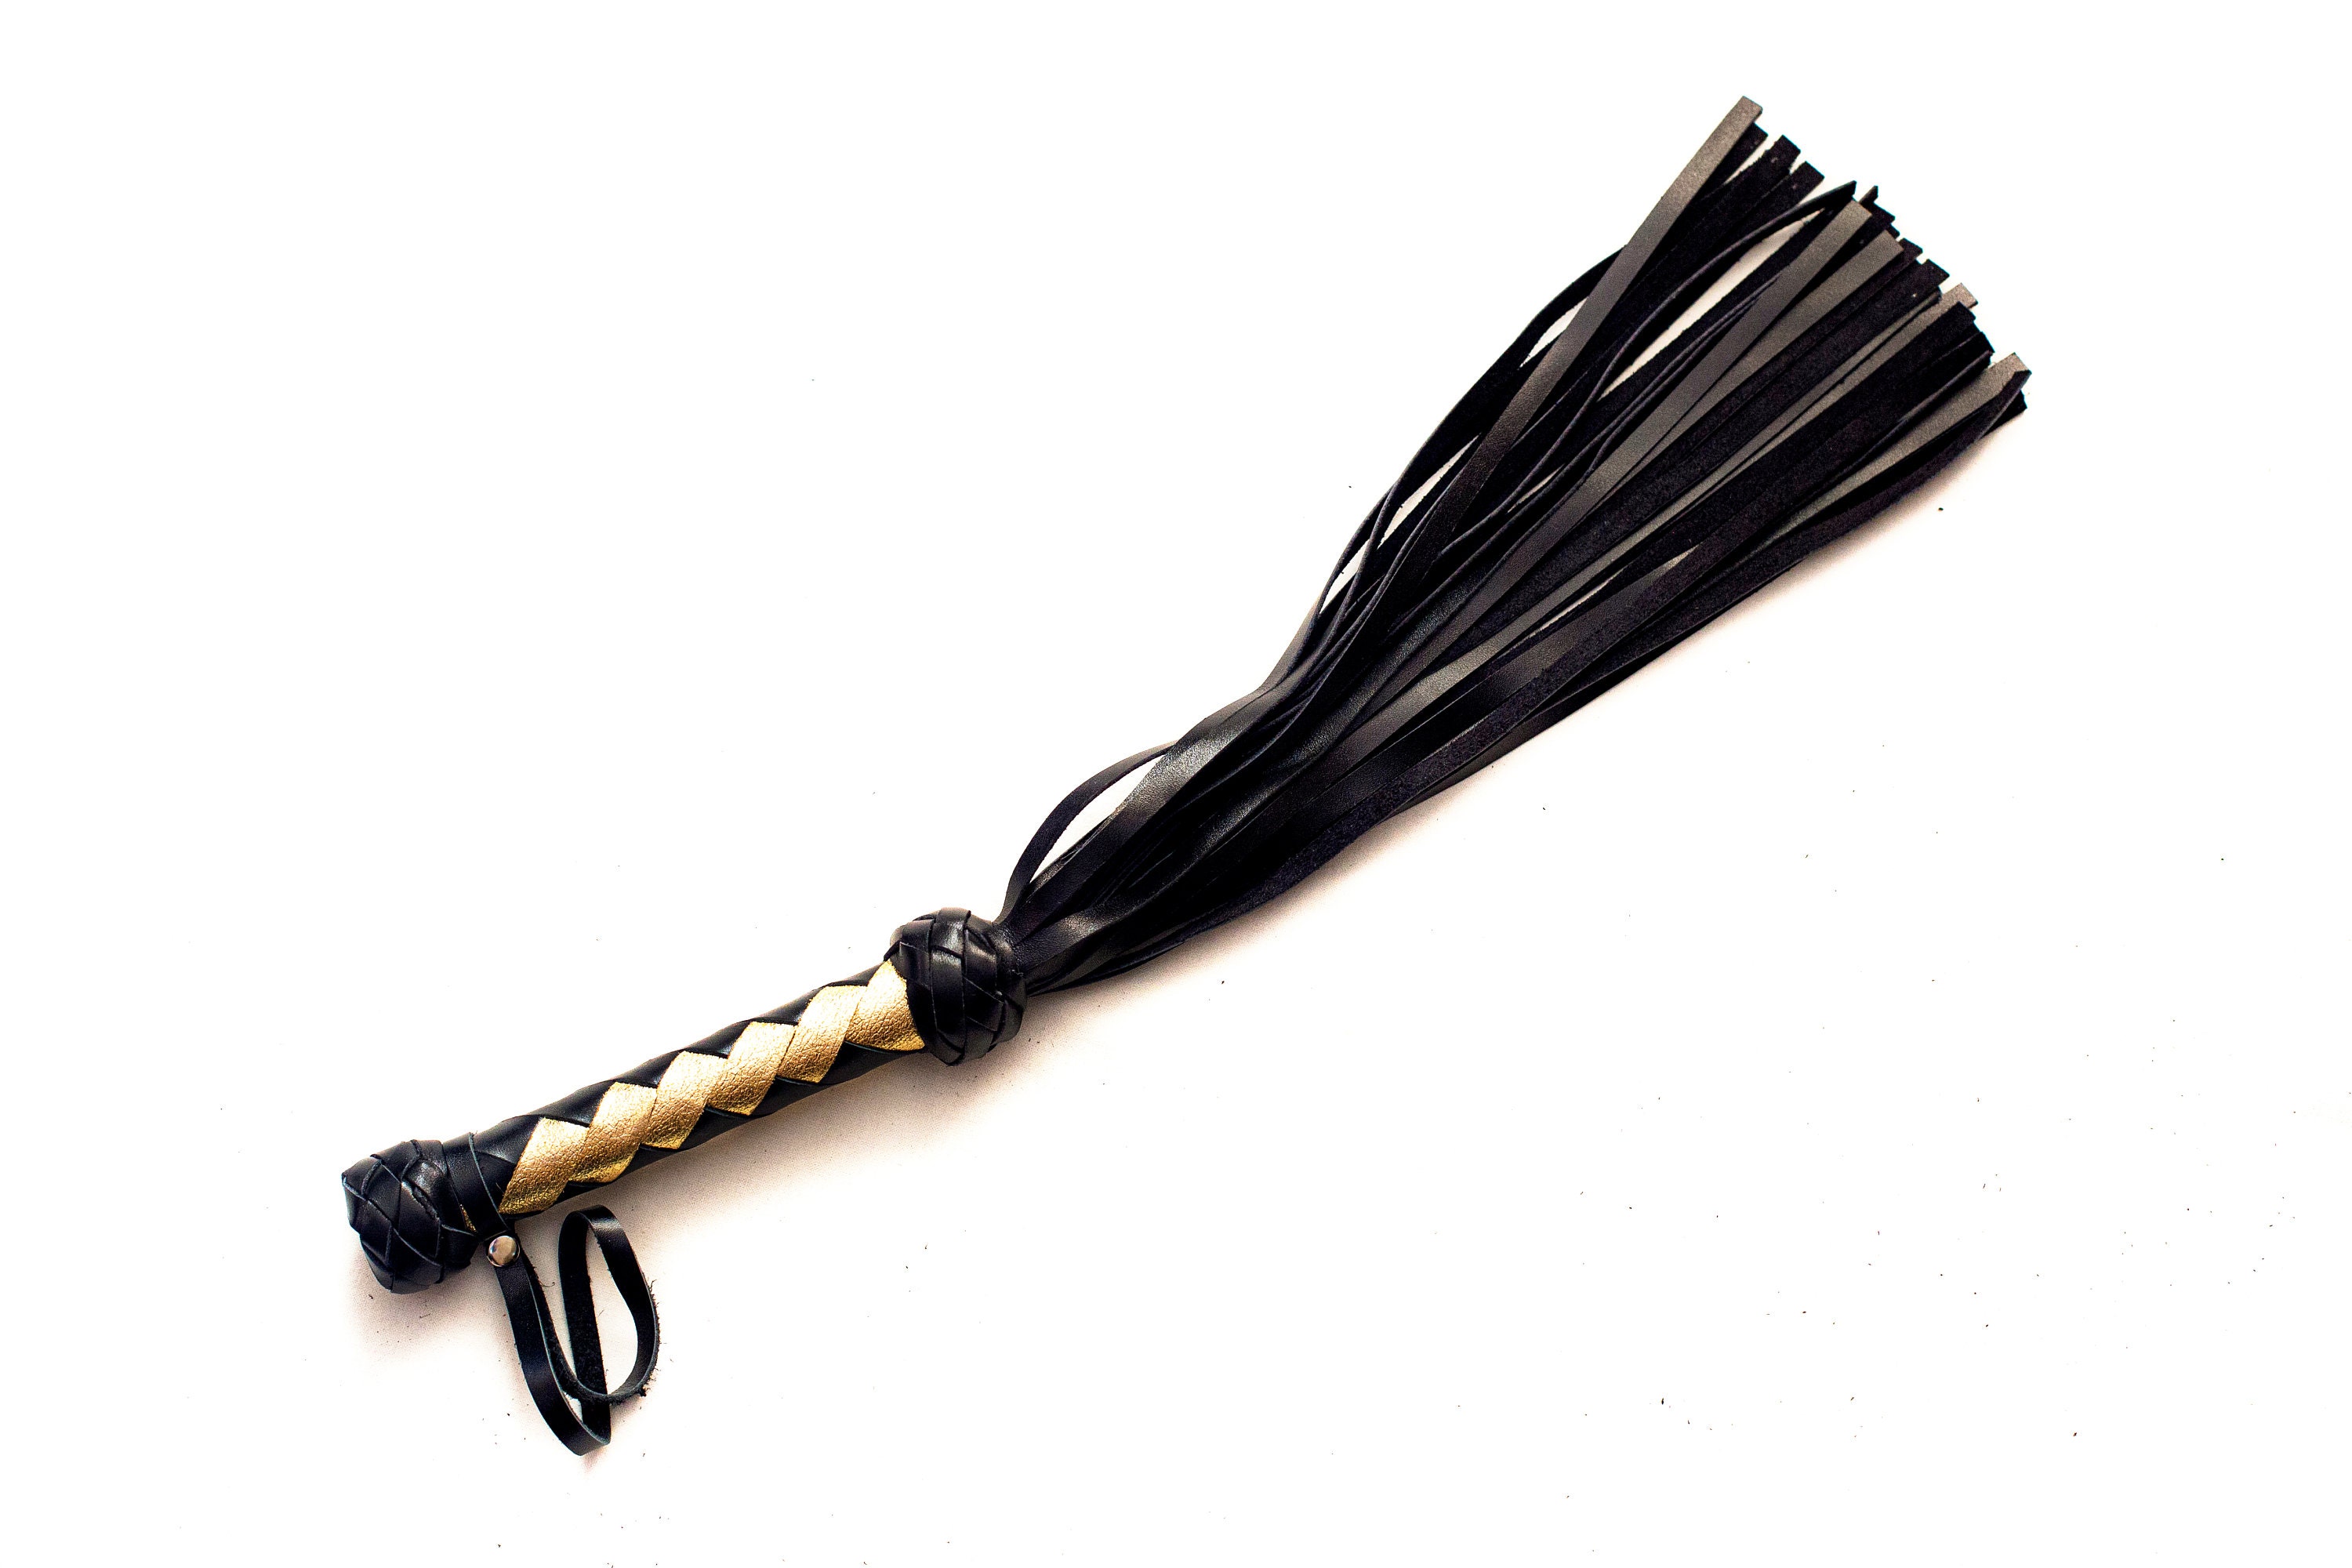 Leather Whips Kit Real Leather Whips Set Whips Riding Crop Twigs Catonine  Martinet Equestrian Wax Play Candle Handmade 